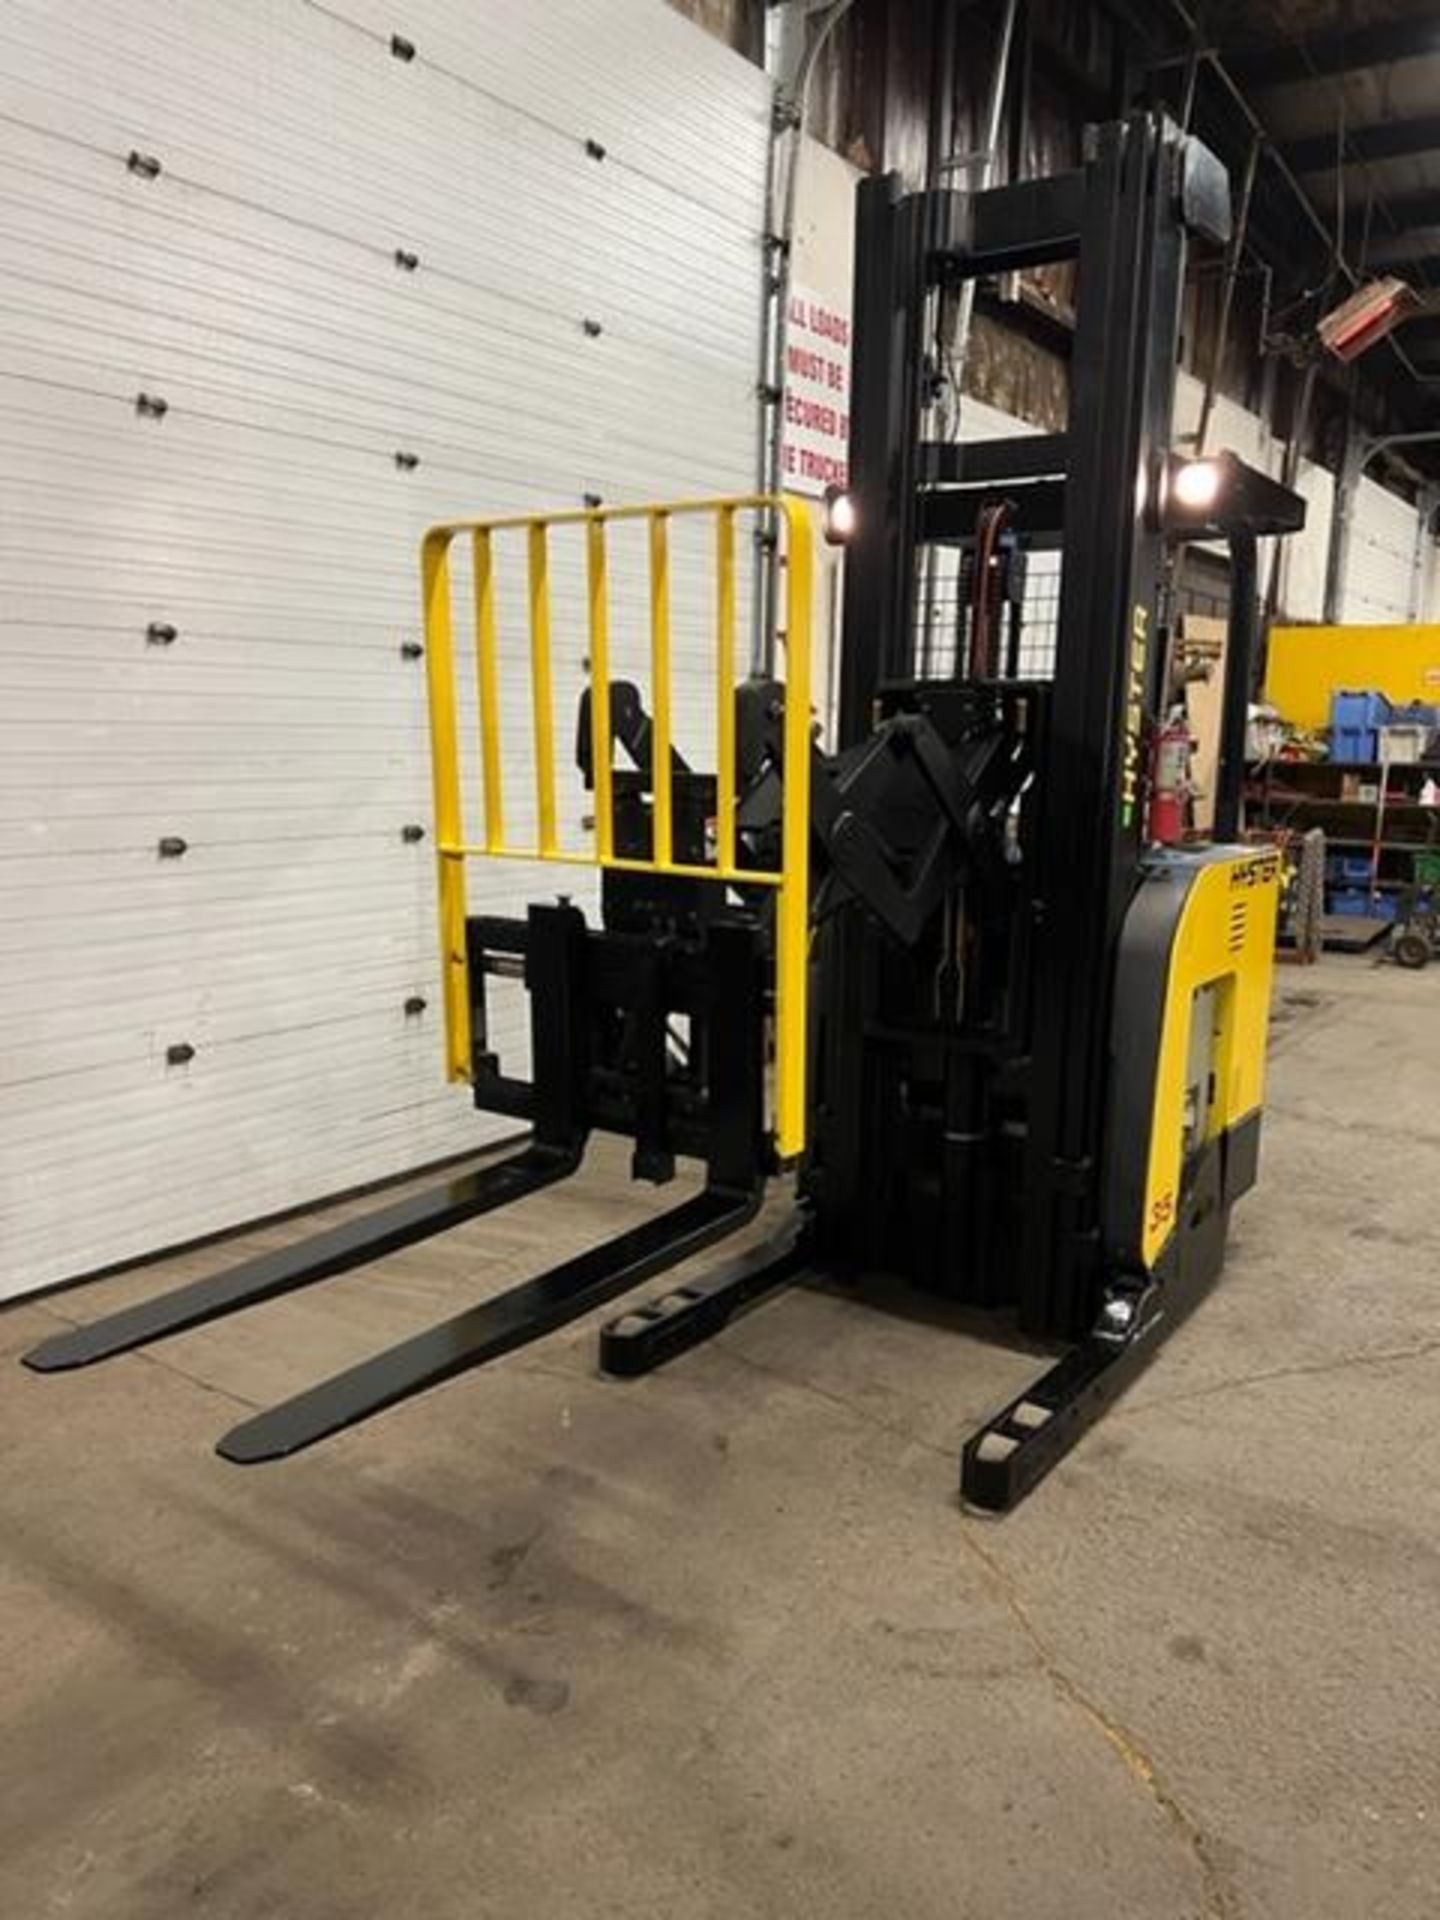 FREE CUSTOMS - 2013 Hyster Extra Reach Truck Pallet Lifter EXTRA REACH TRUCK 3500lbs capacity - Image 2 of 3